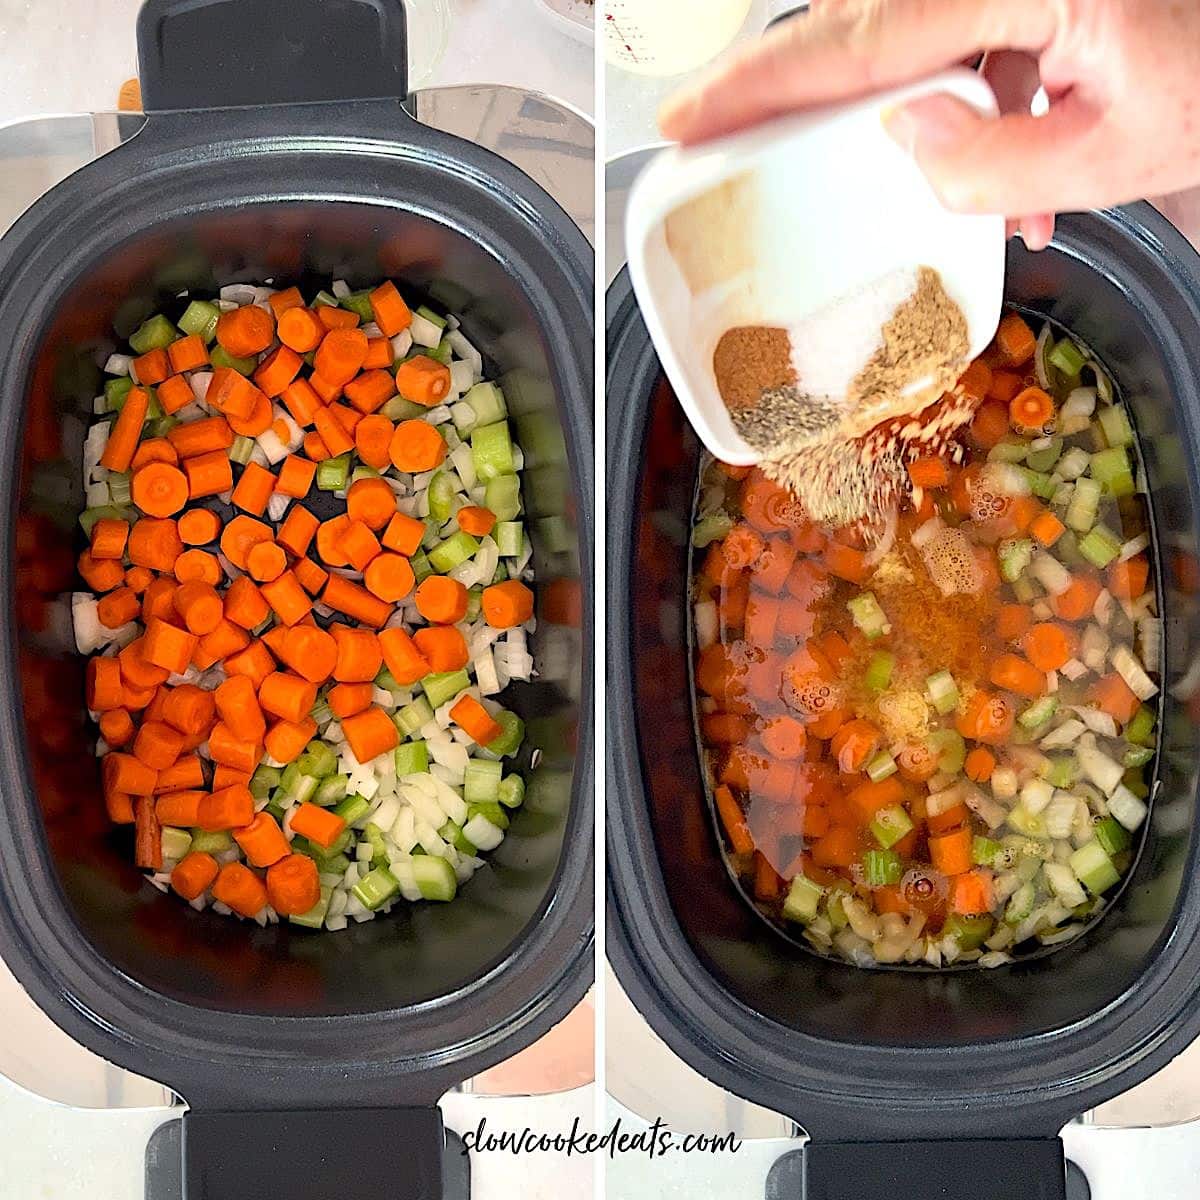 Adding all the crock pot carrot soup ingredients to a black oval slow cooker.